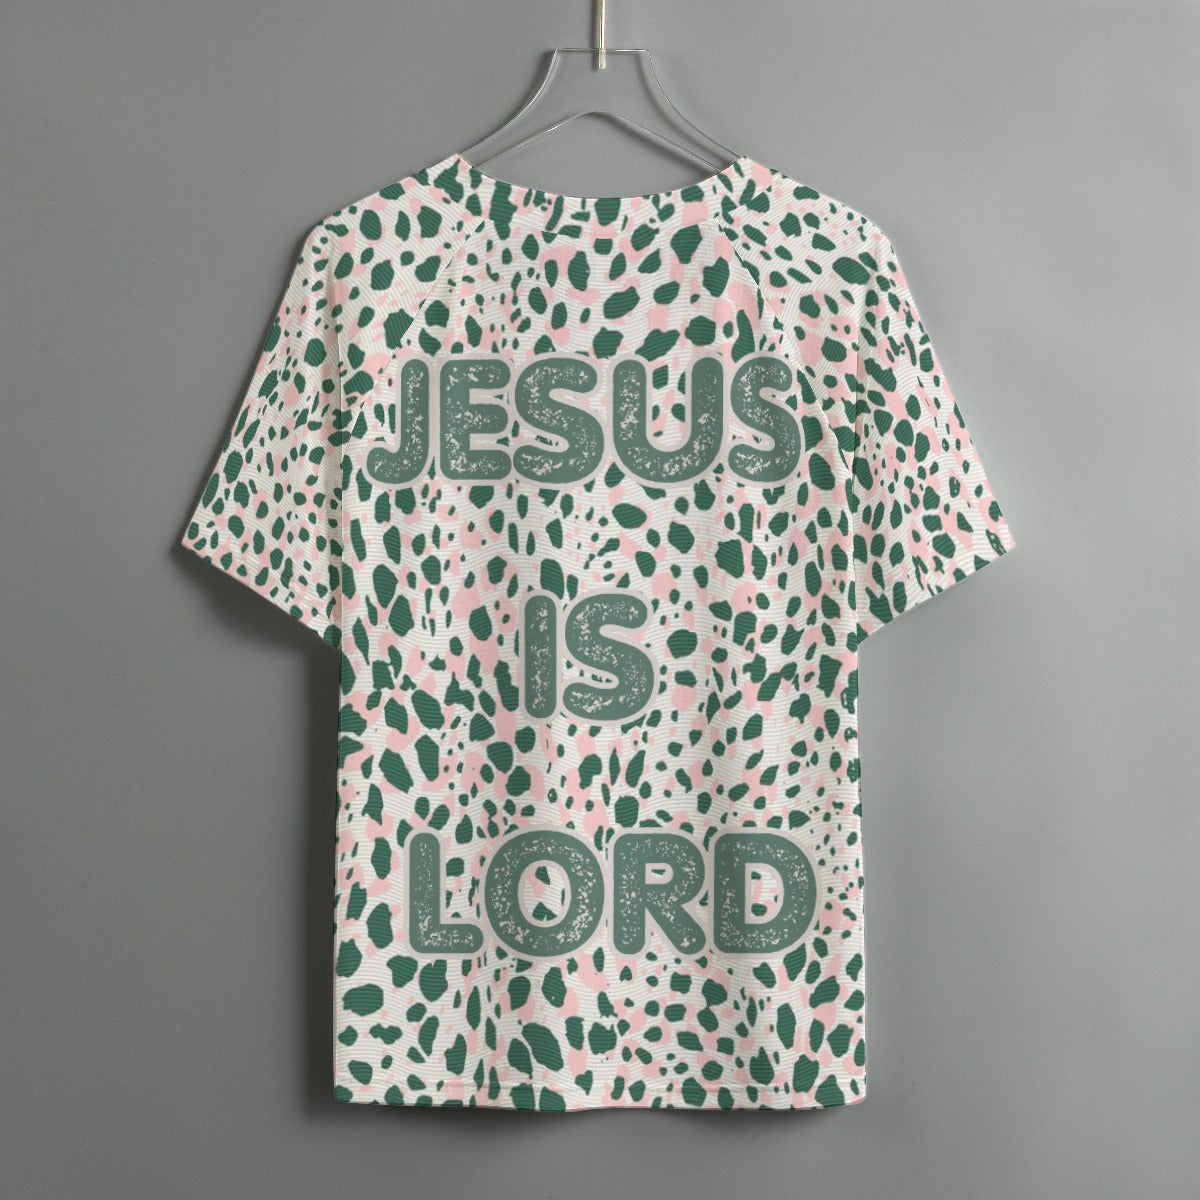 Jesus is LORD Women's V-neck T-shirt